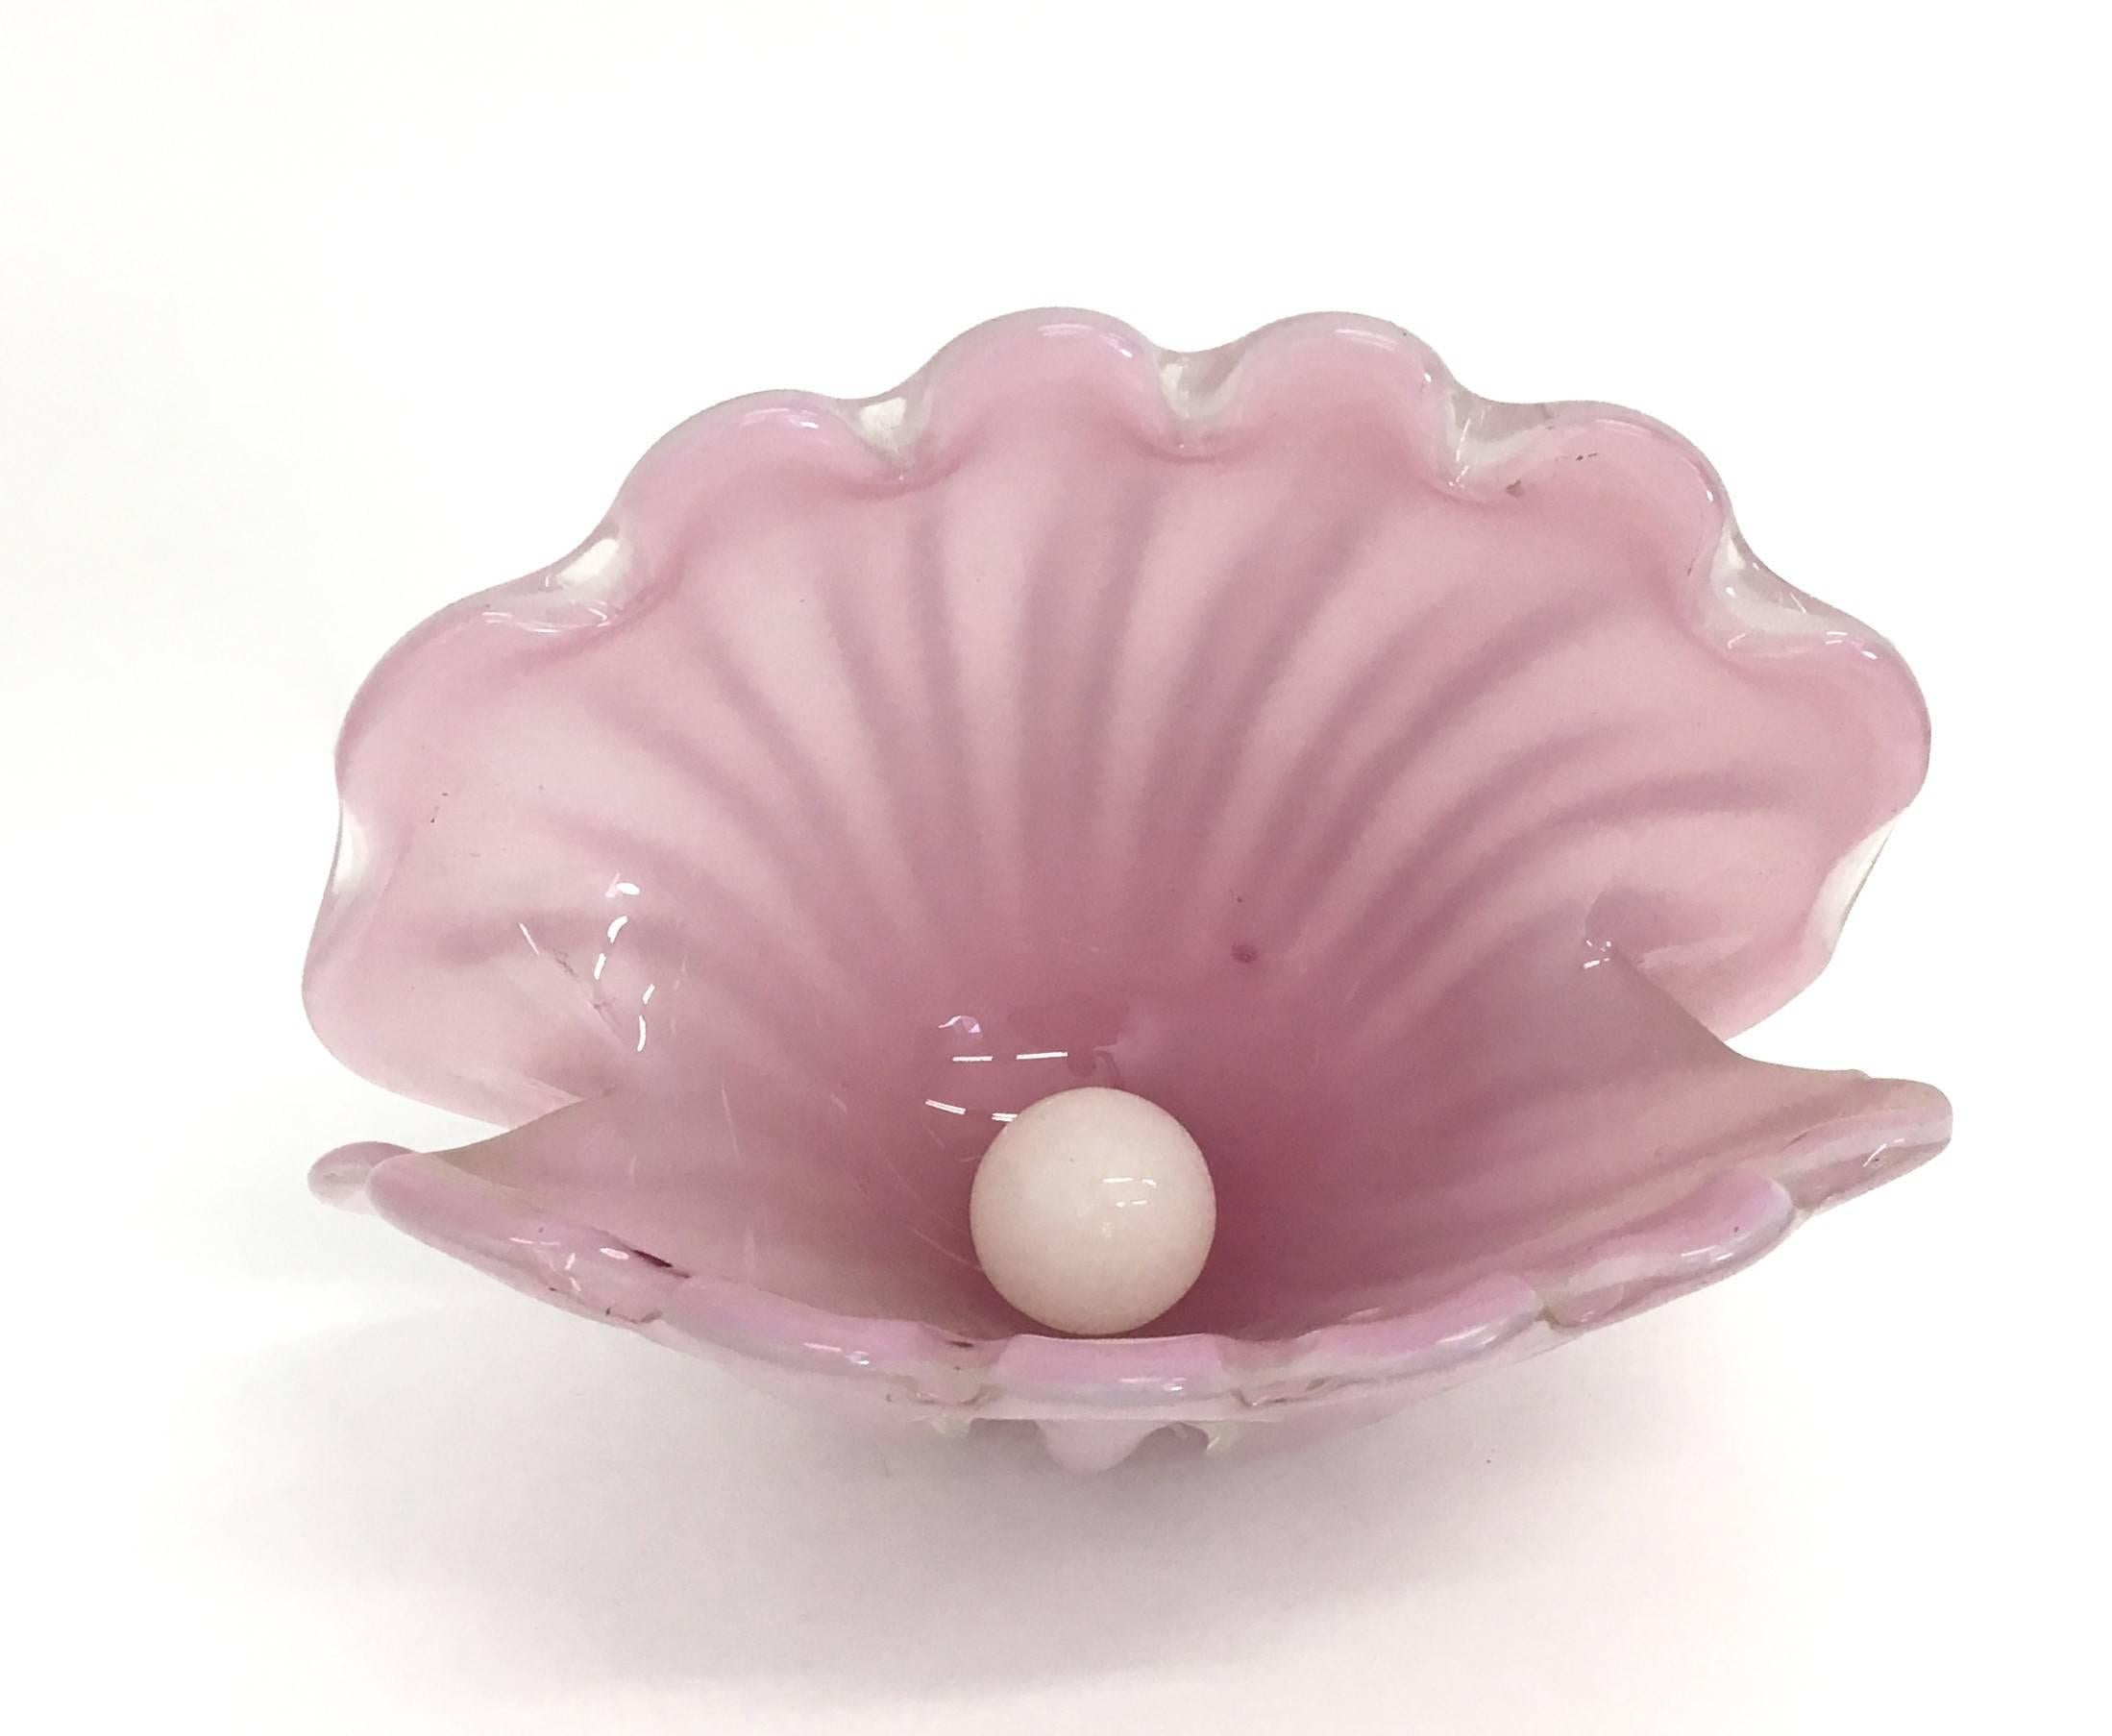 This large shell bowl is made from pink opaline glass under 'lattimo' glass opalescent ribs, with a scalloped rim, folded ends, and two polished bases, so the shell can rest straight or tilted.
In very good condition and ready to become a piece in a